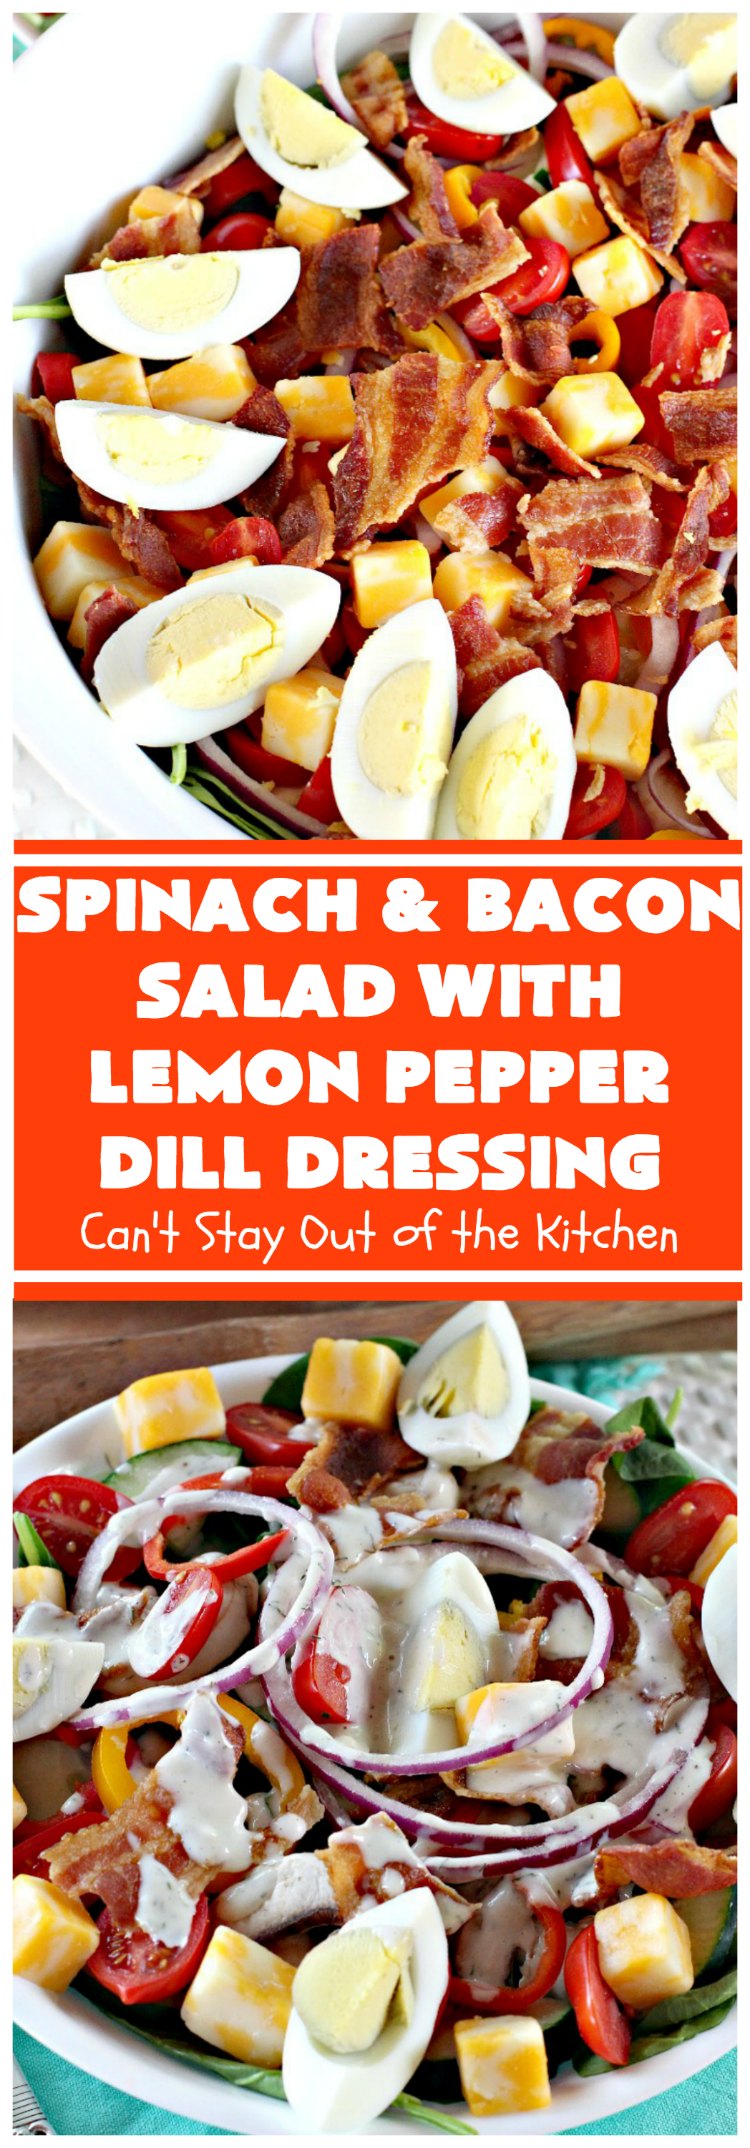 Spinach and Bacon Salad with Lemon Pepper Dill Dressing | Can't Stay Out of the Kitchen